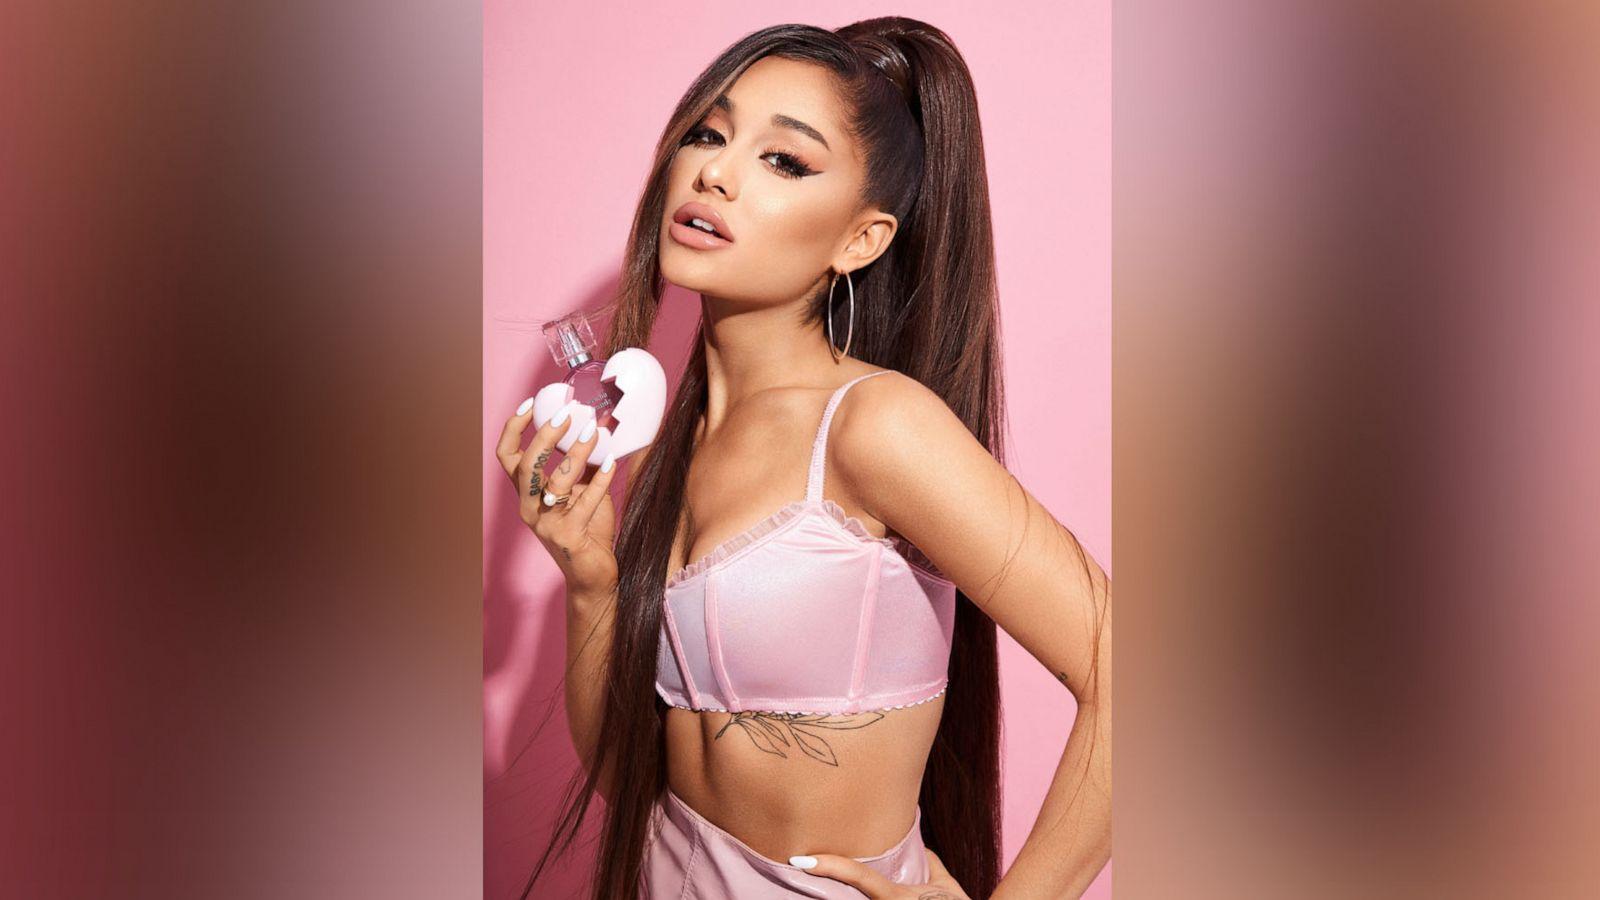 Here's what we know about Ariana Grande's new Thank U, Next.